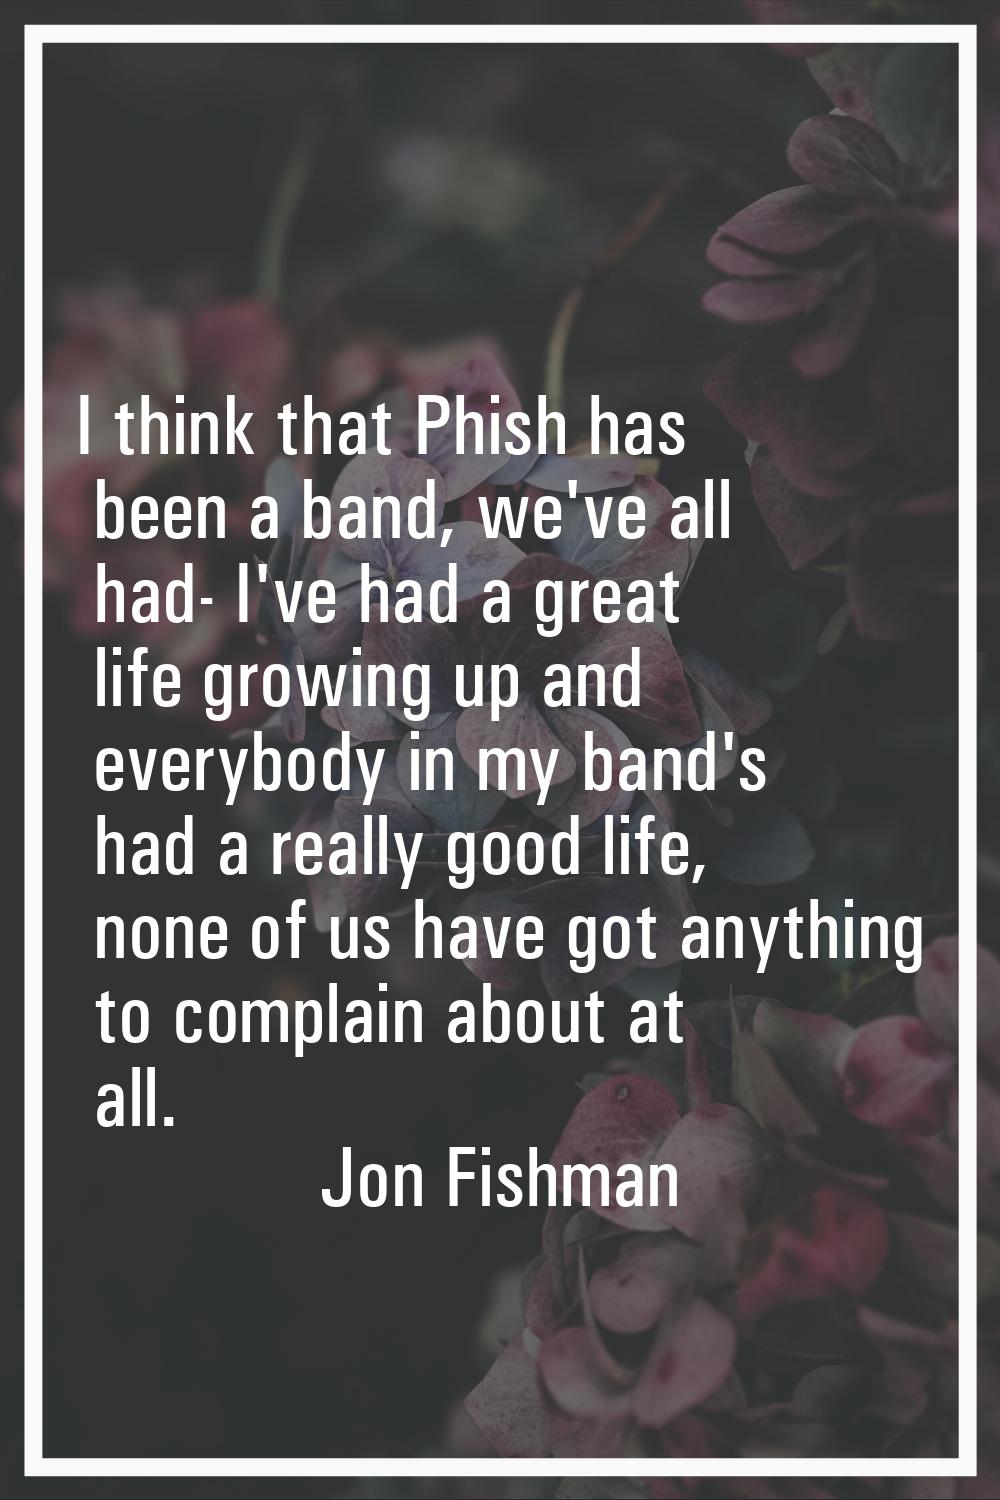 I think that Phish has been a band, we've all had- I've had a great life growing up and everybody i